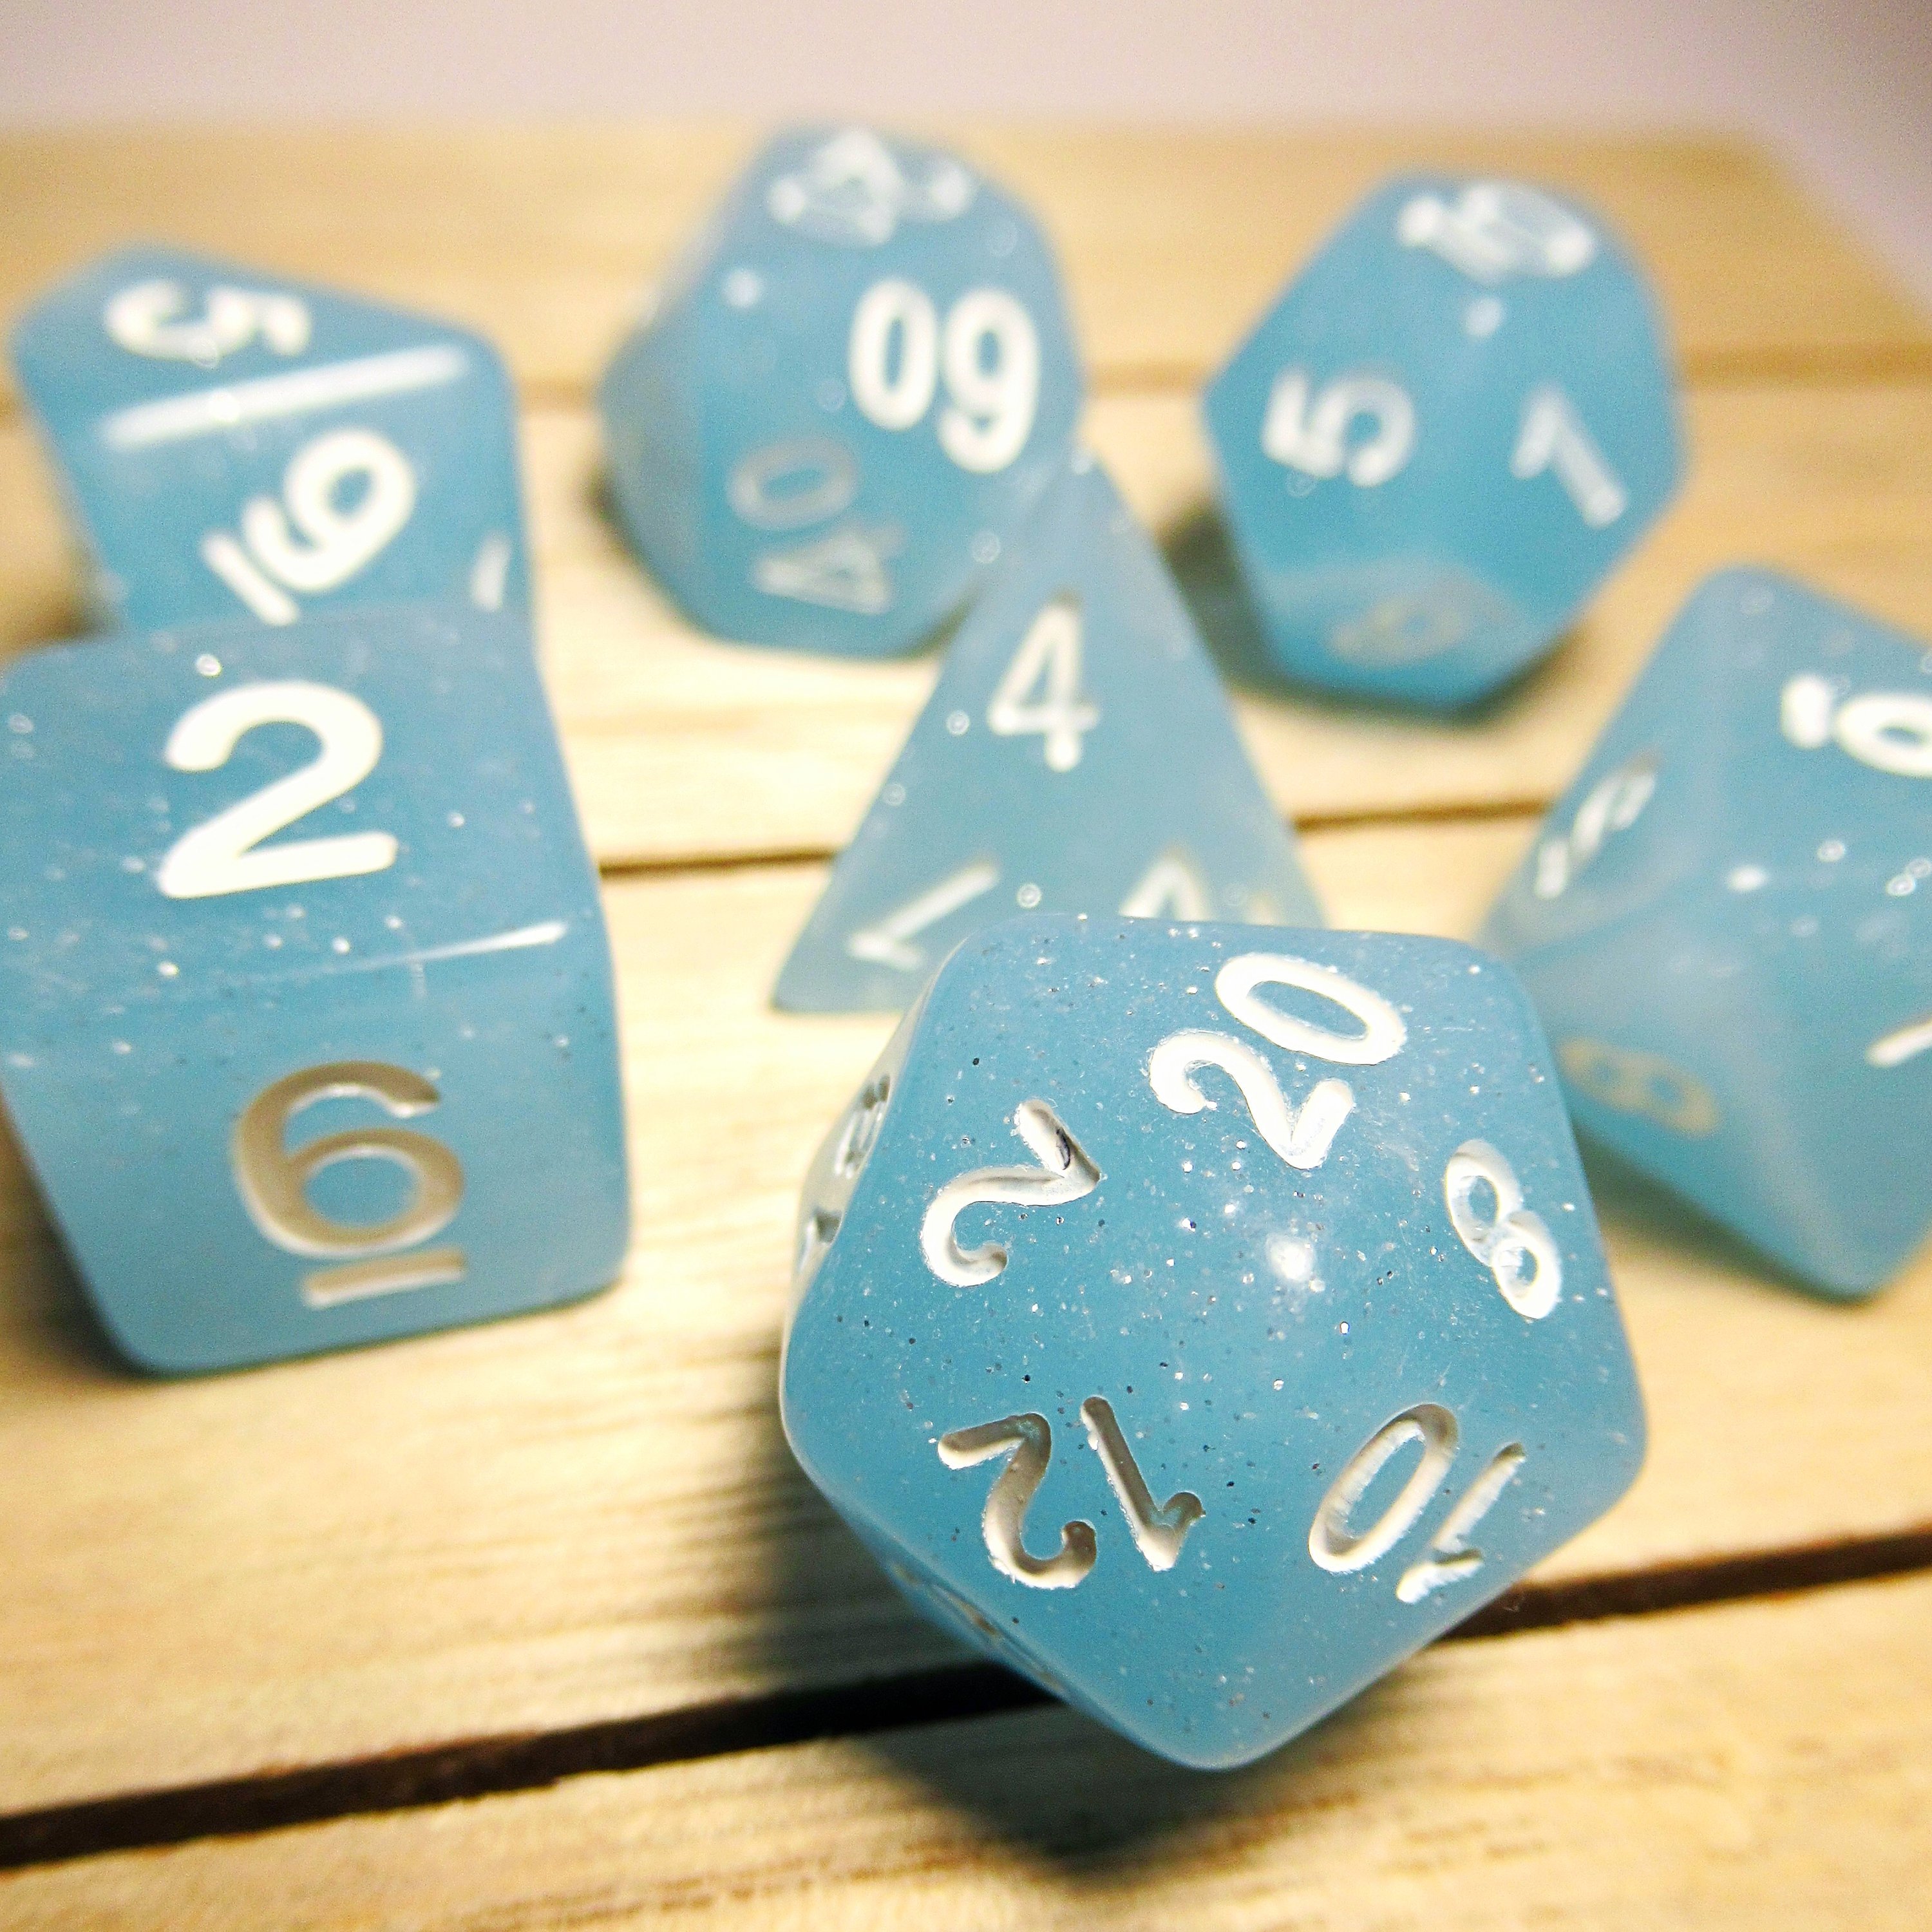 Translucent pale blue polyhedral dice with silver shimmers and white lettering.